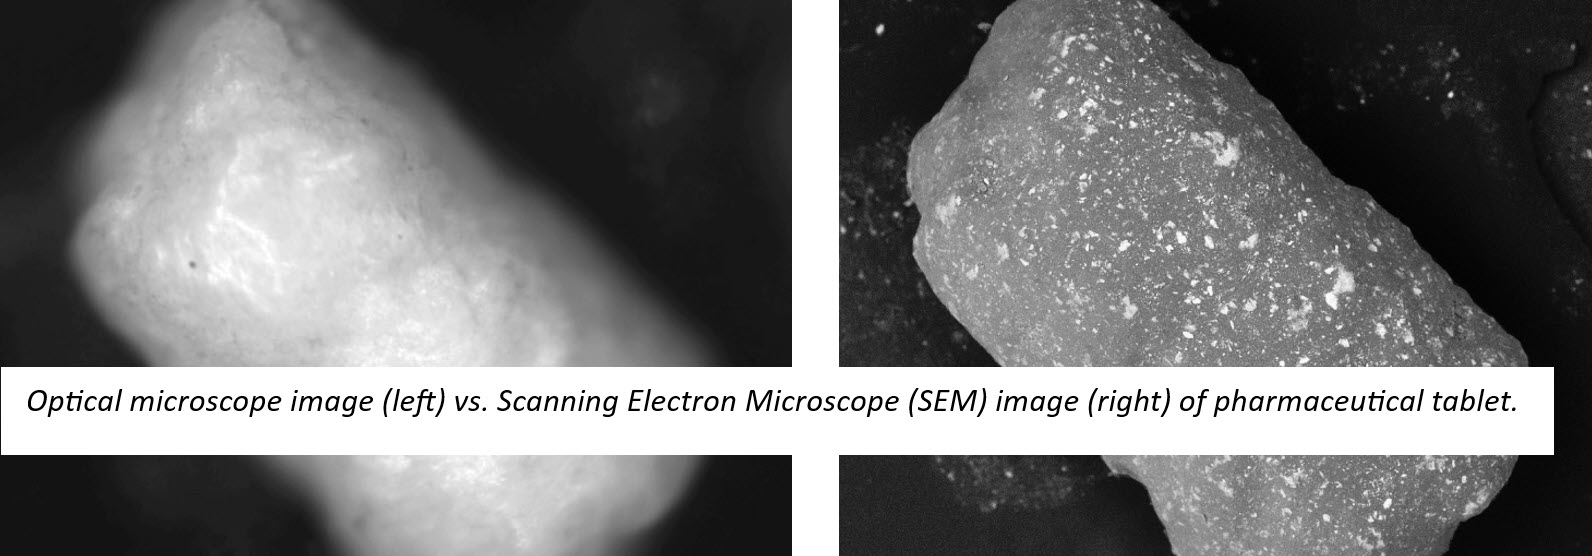 Advantages of Benchtop Scanning Electron Microscopy